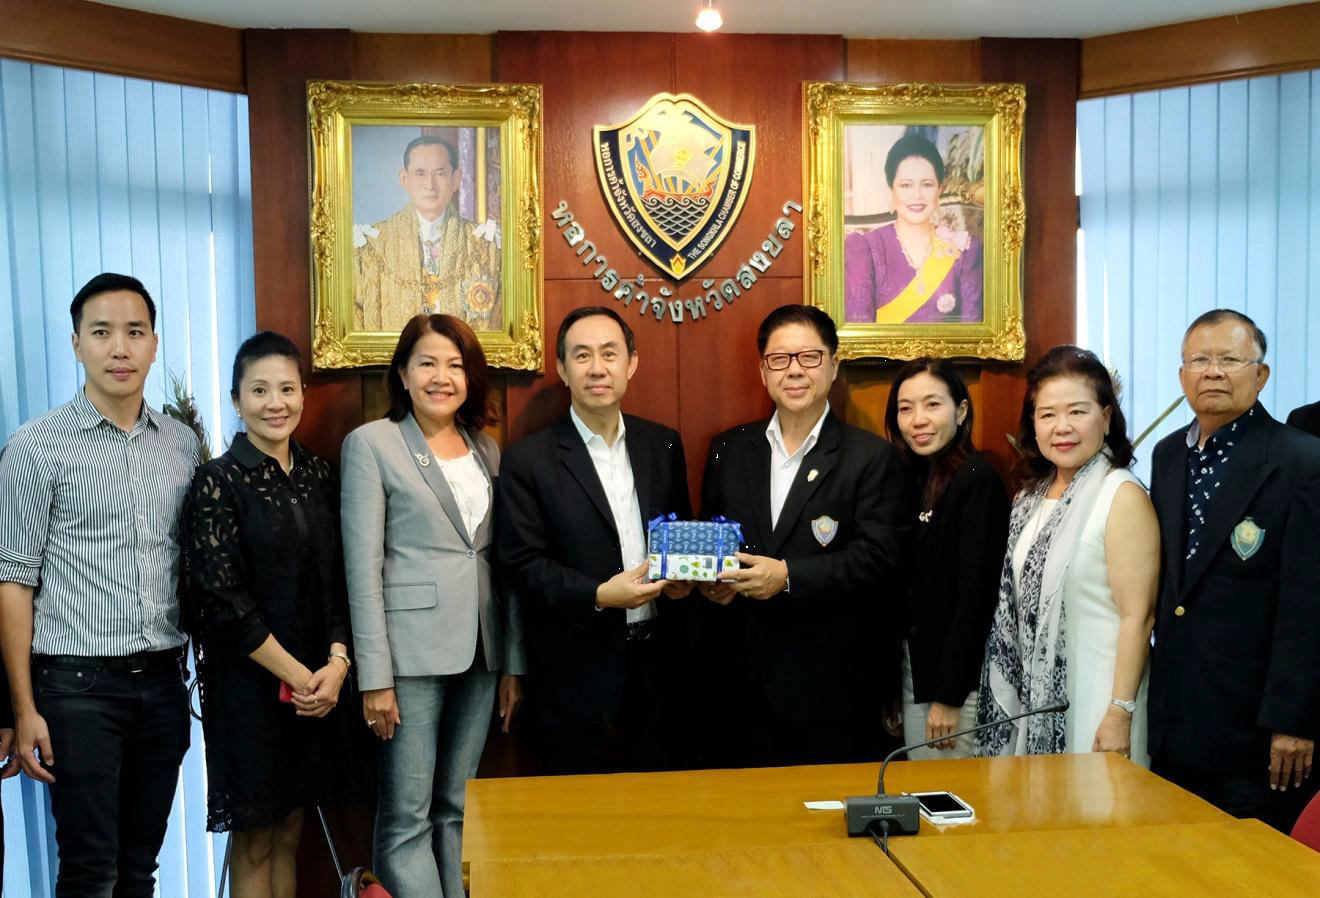 EXIM Thailand Discusses with Songkhla Chamber of Commerce to Promote Southern Thai Business Expansion into International Market